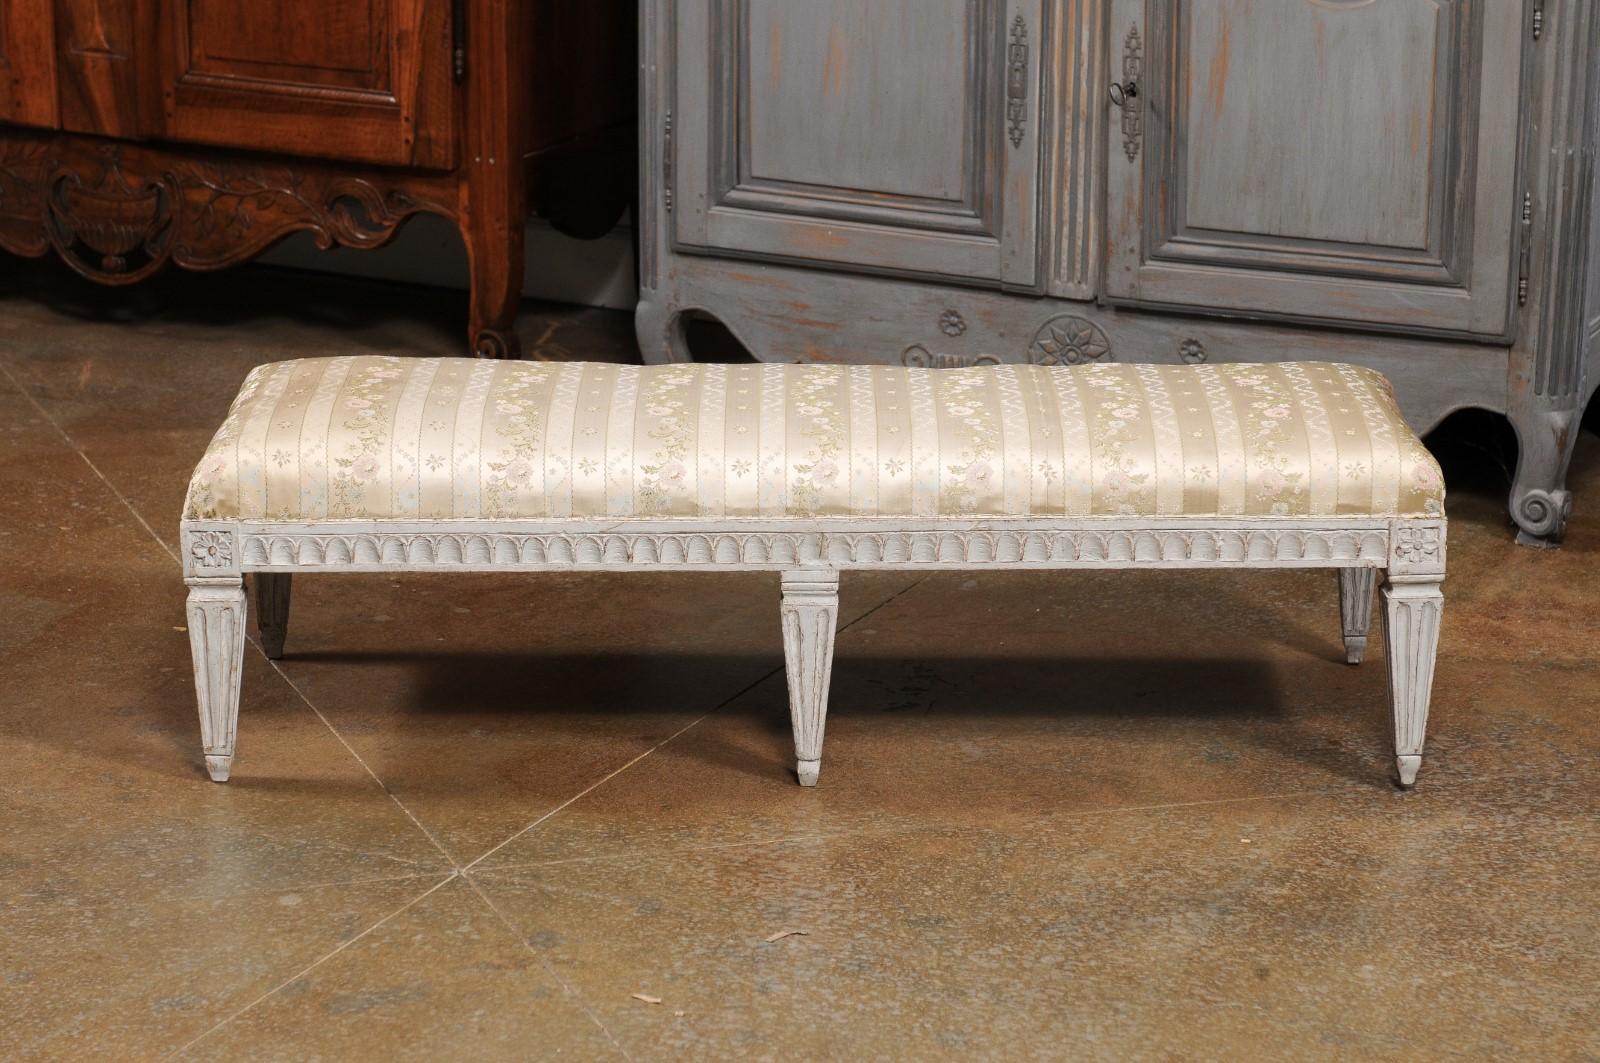 Swedish Neoclassical Style 1880s Painted Wood Bench with Carved Waterleaf Motifs For Sale 6